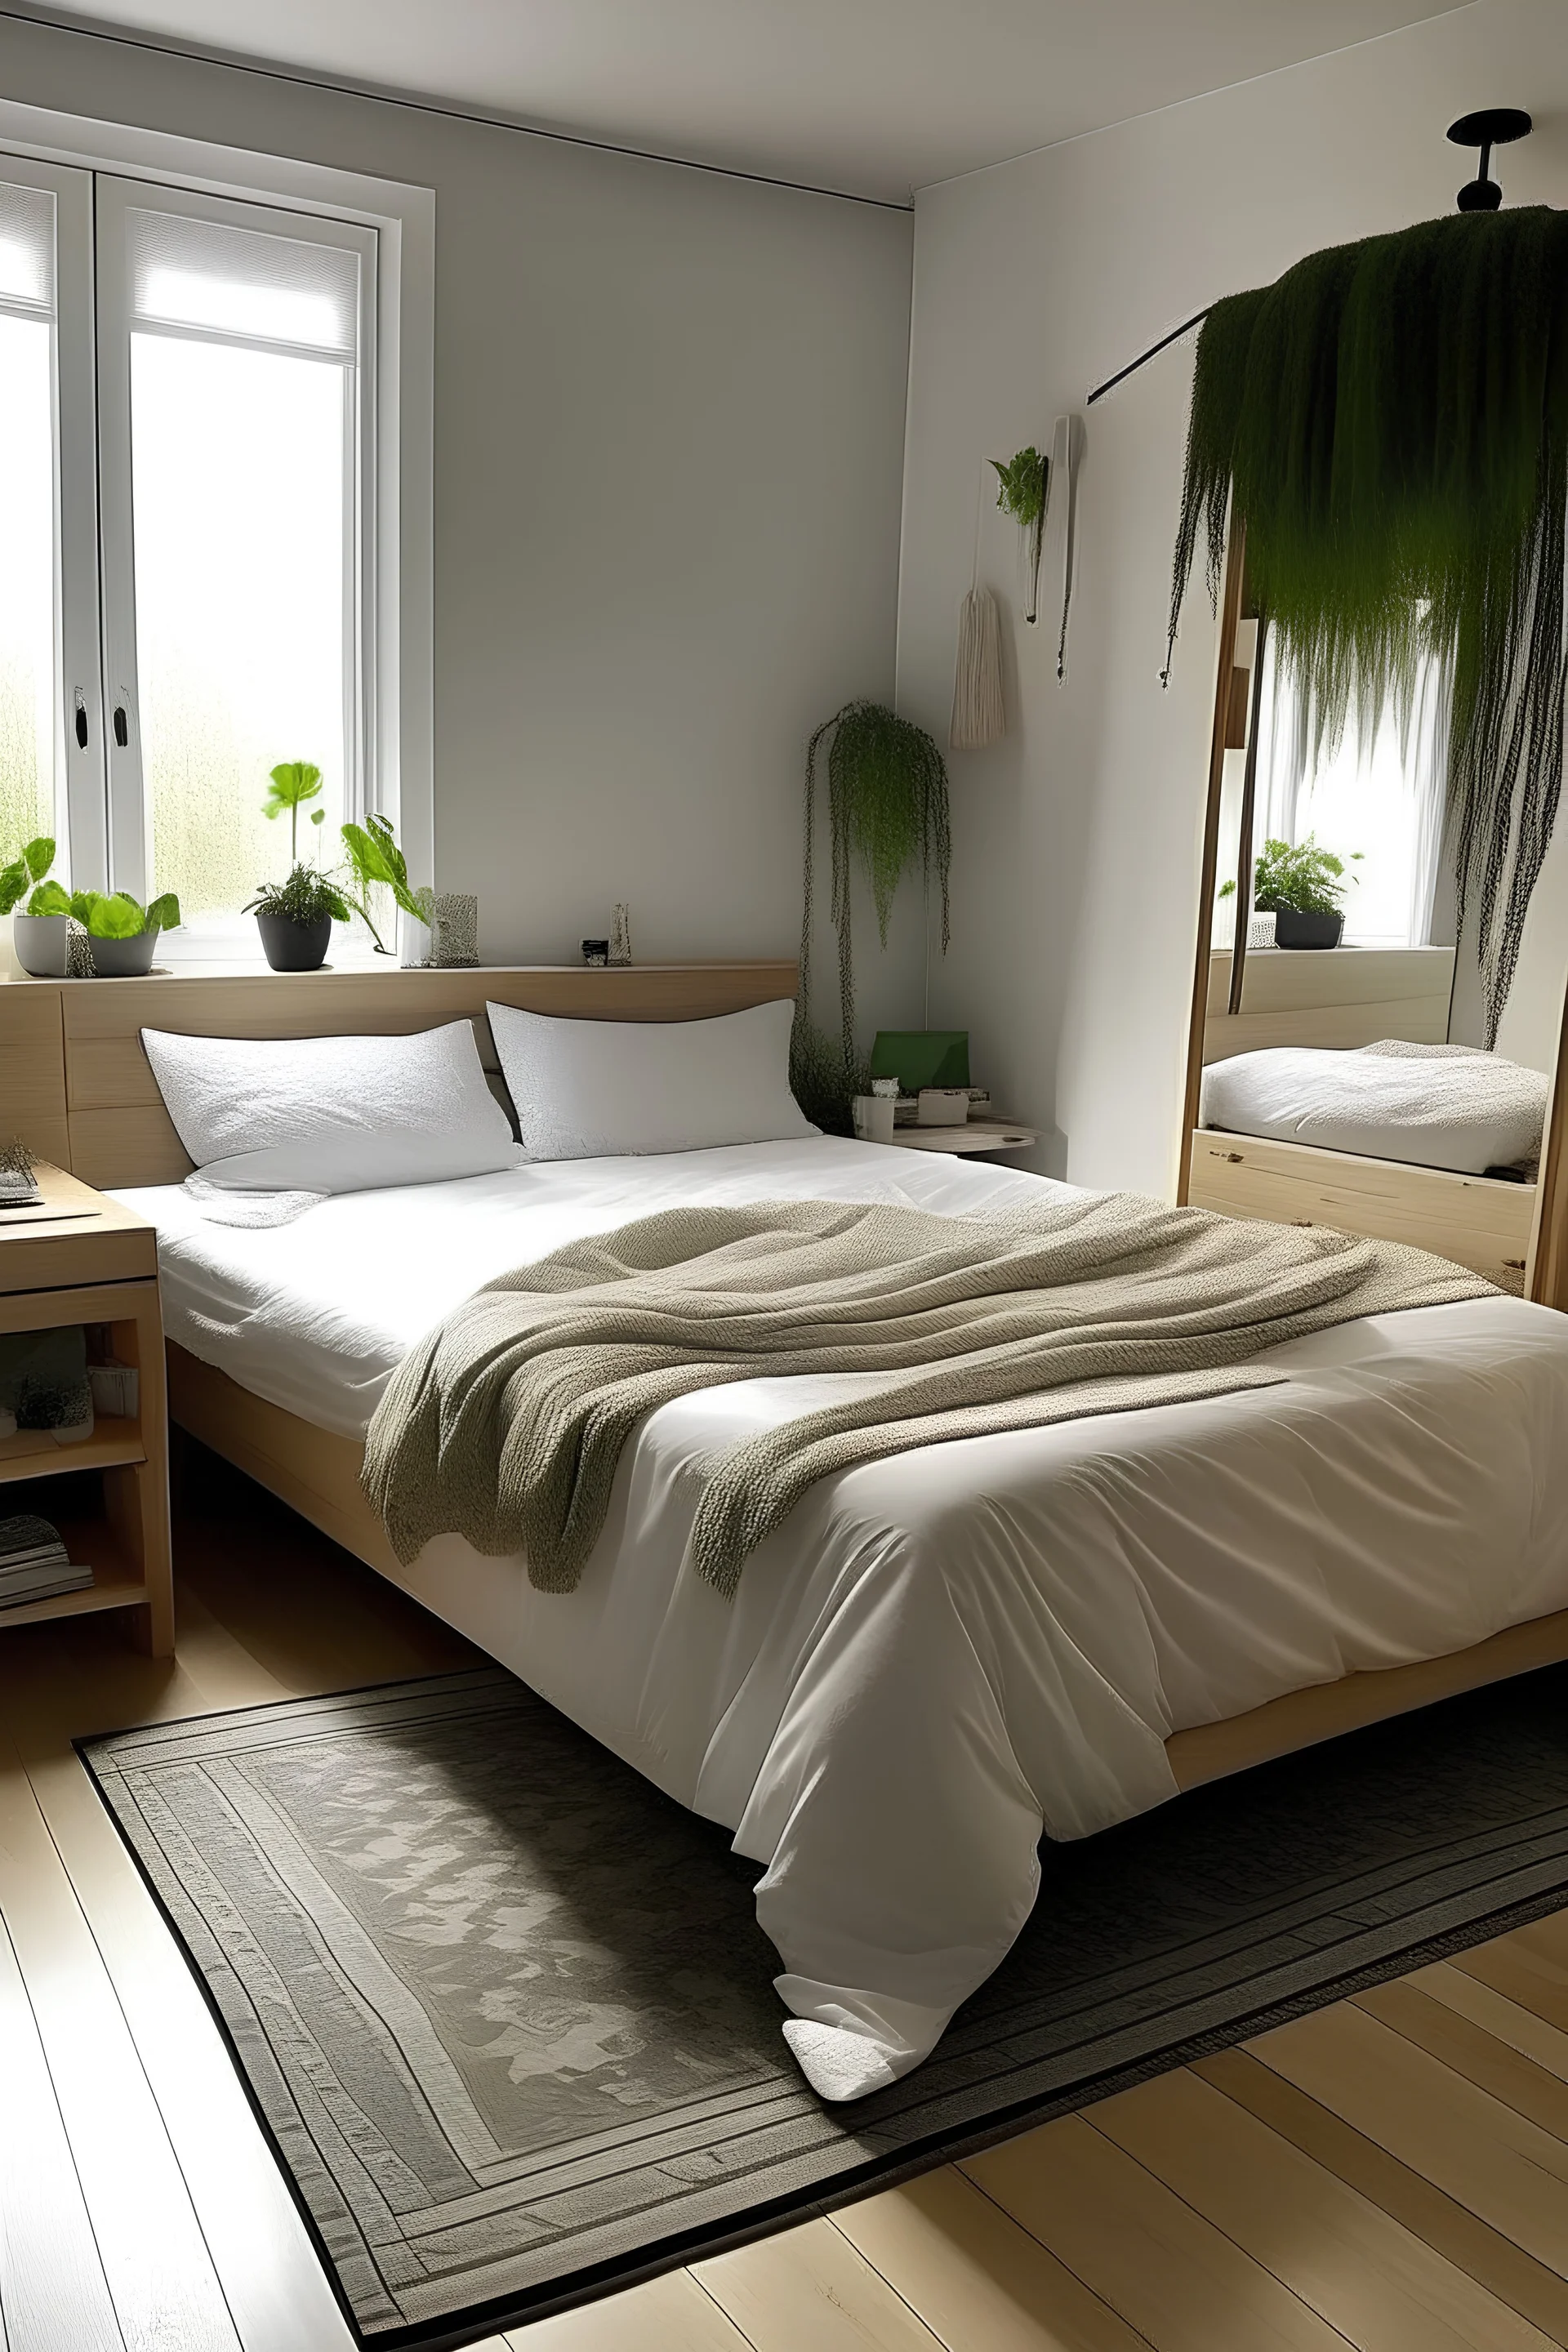 Decorate this bedroom. Create an nature enviroment with accessible furniture (i.e., can be purchased in Ikea)